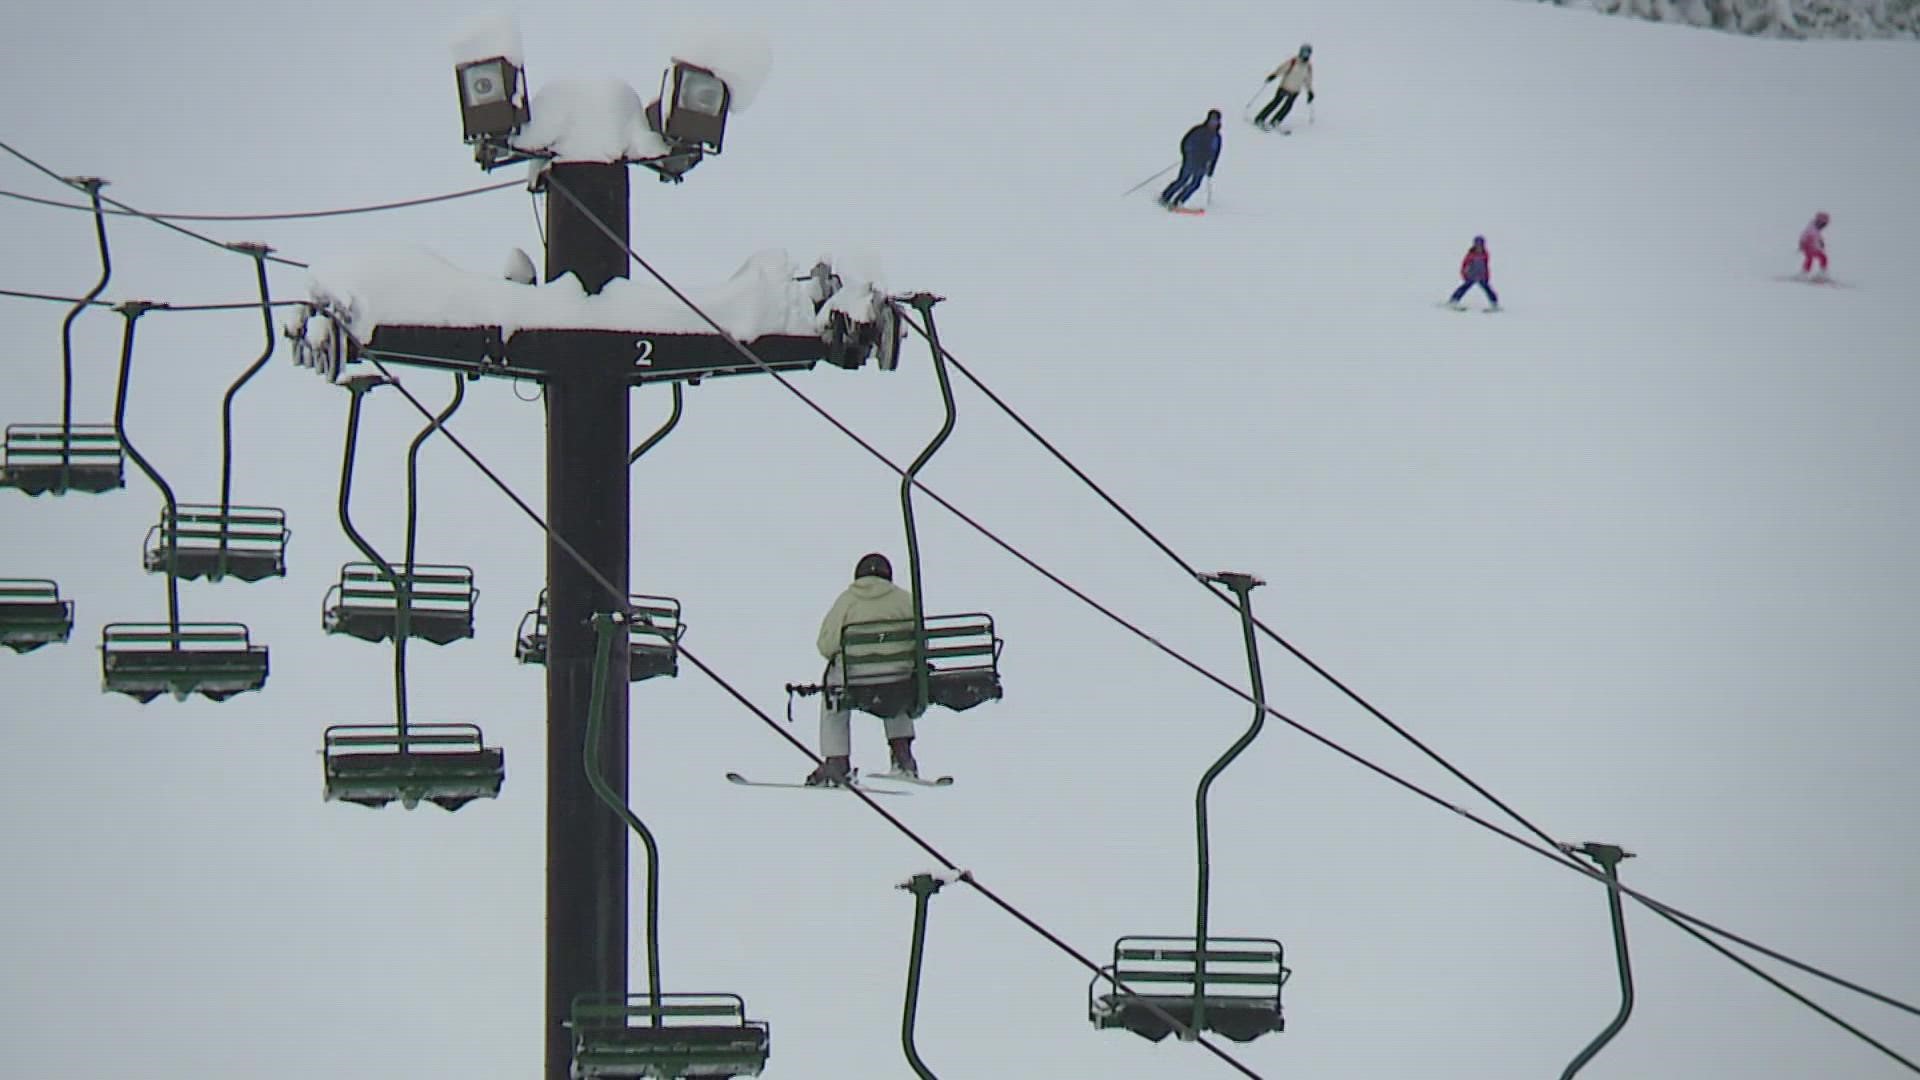 Summit at Snoqualmie opens to passholders